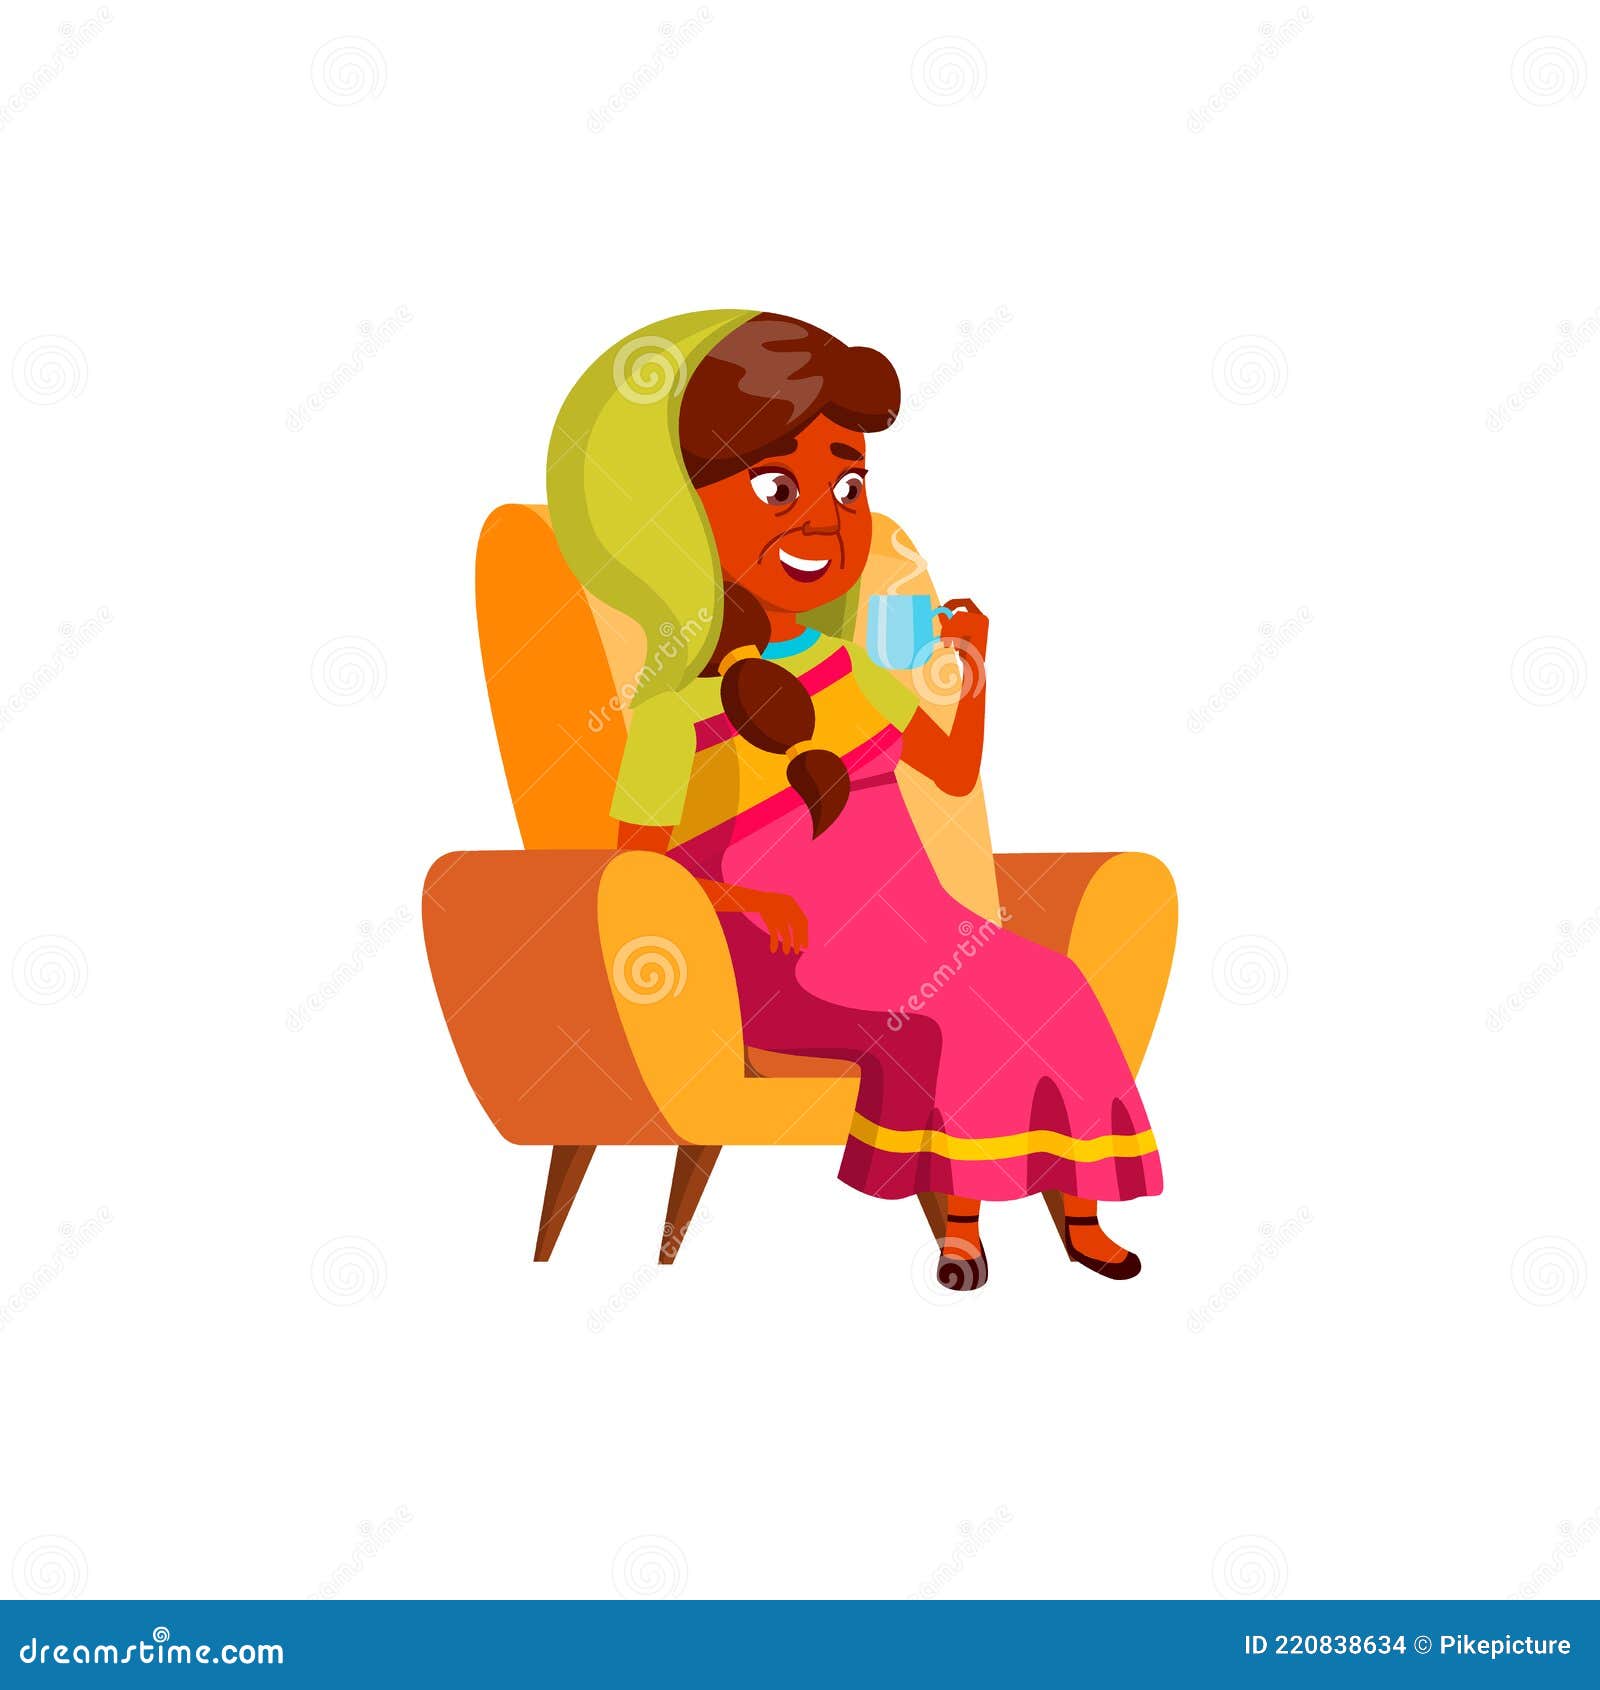 Indian Woman Pensioner Sitting in Chair and Enjoying Hot Tea Cartoon Vector  Stock Vector - Illustration of child, character: 220838634